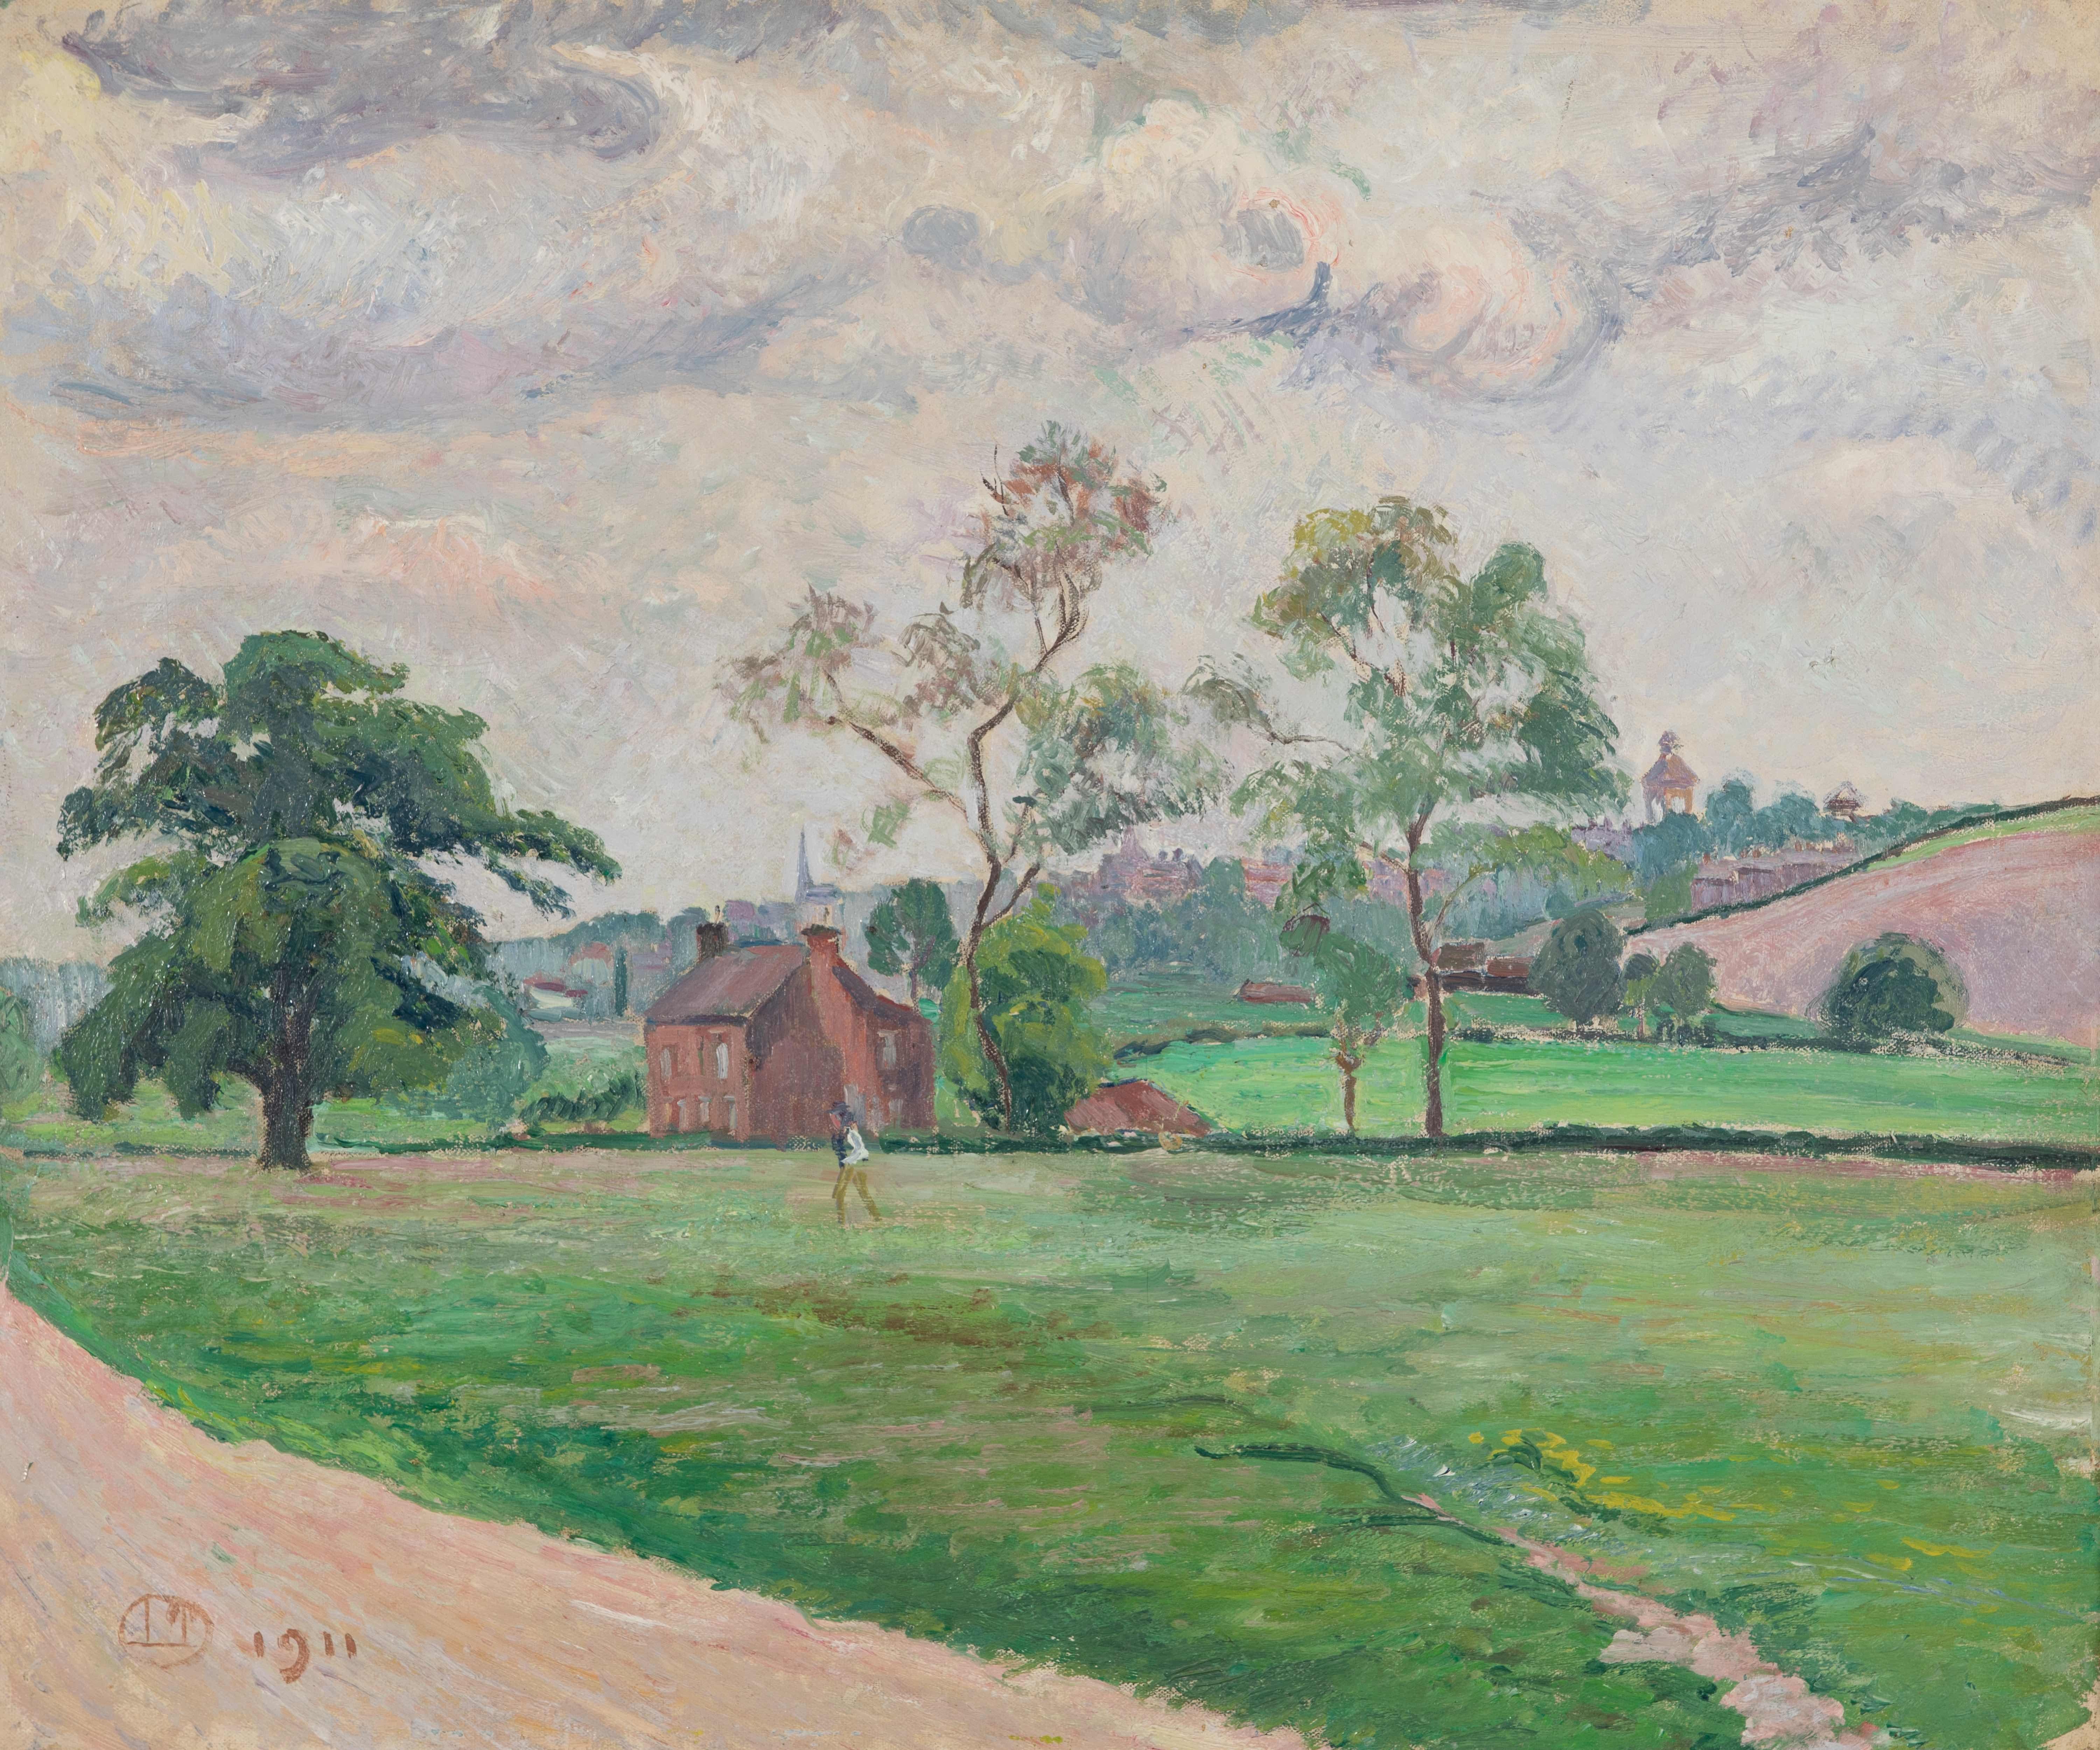 Stormy Weather, Colchester by Lucien Pissarro (1863-1944)
Oil on canvas
54.3 x 65.3 cm (21 ³/₈ x 25 ³/₄ inches)
Signed with monogram and dated lower left, 1911

Provenance: The Brook, 1949 (The artist's studio)
Leicester Galleries, Leicester,